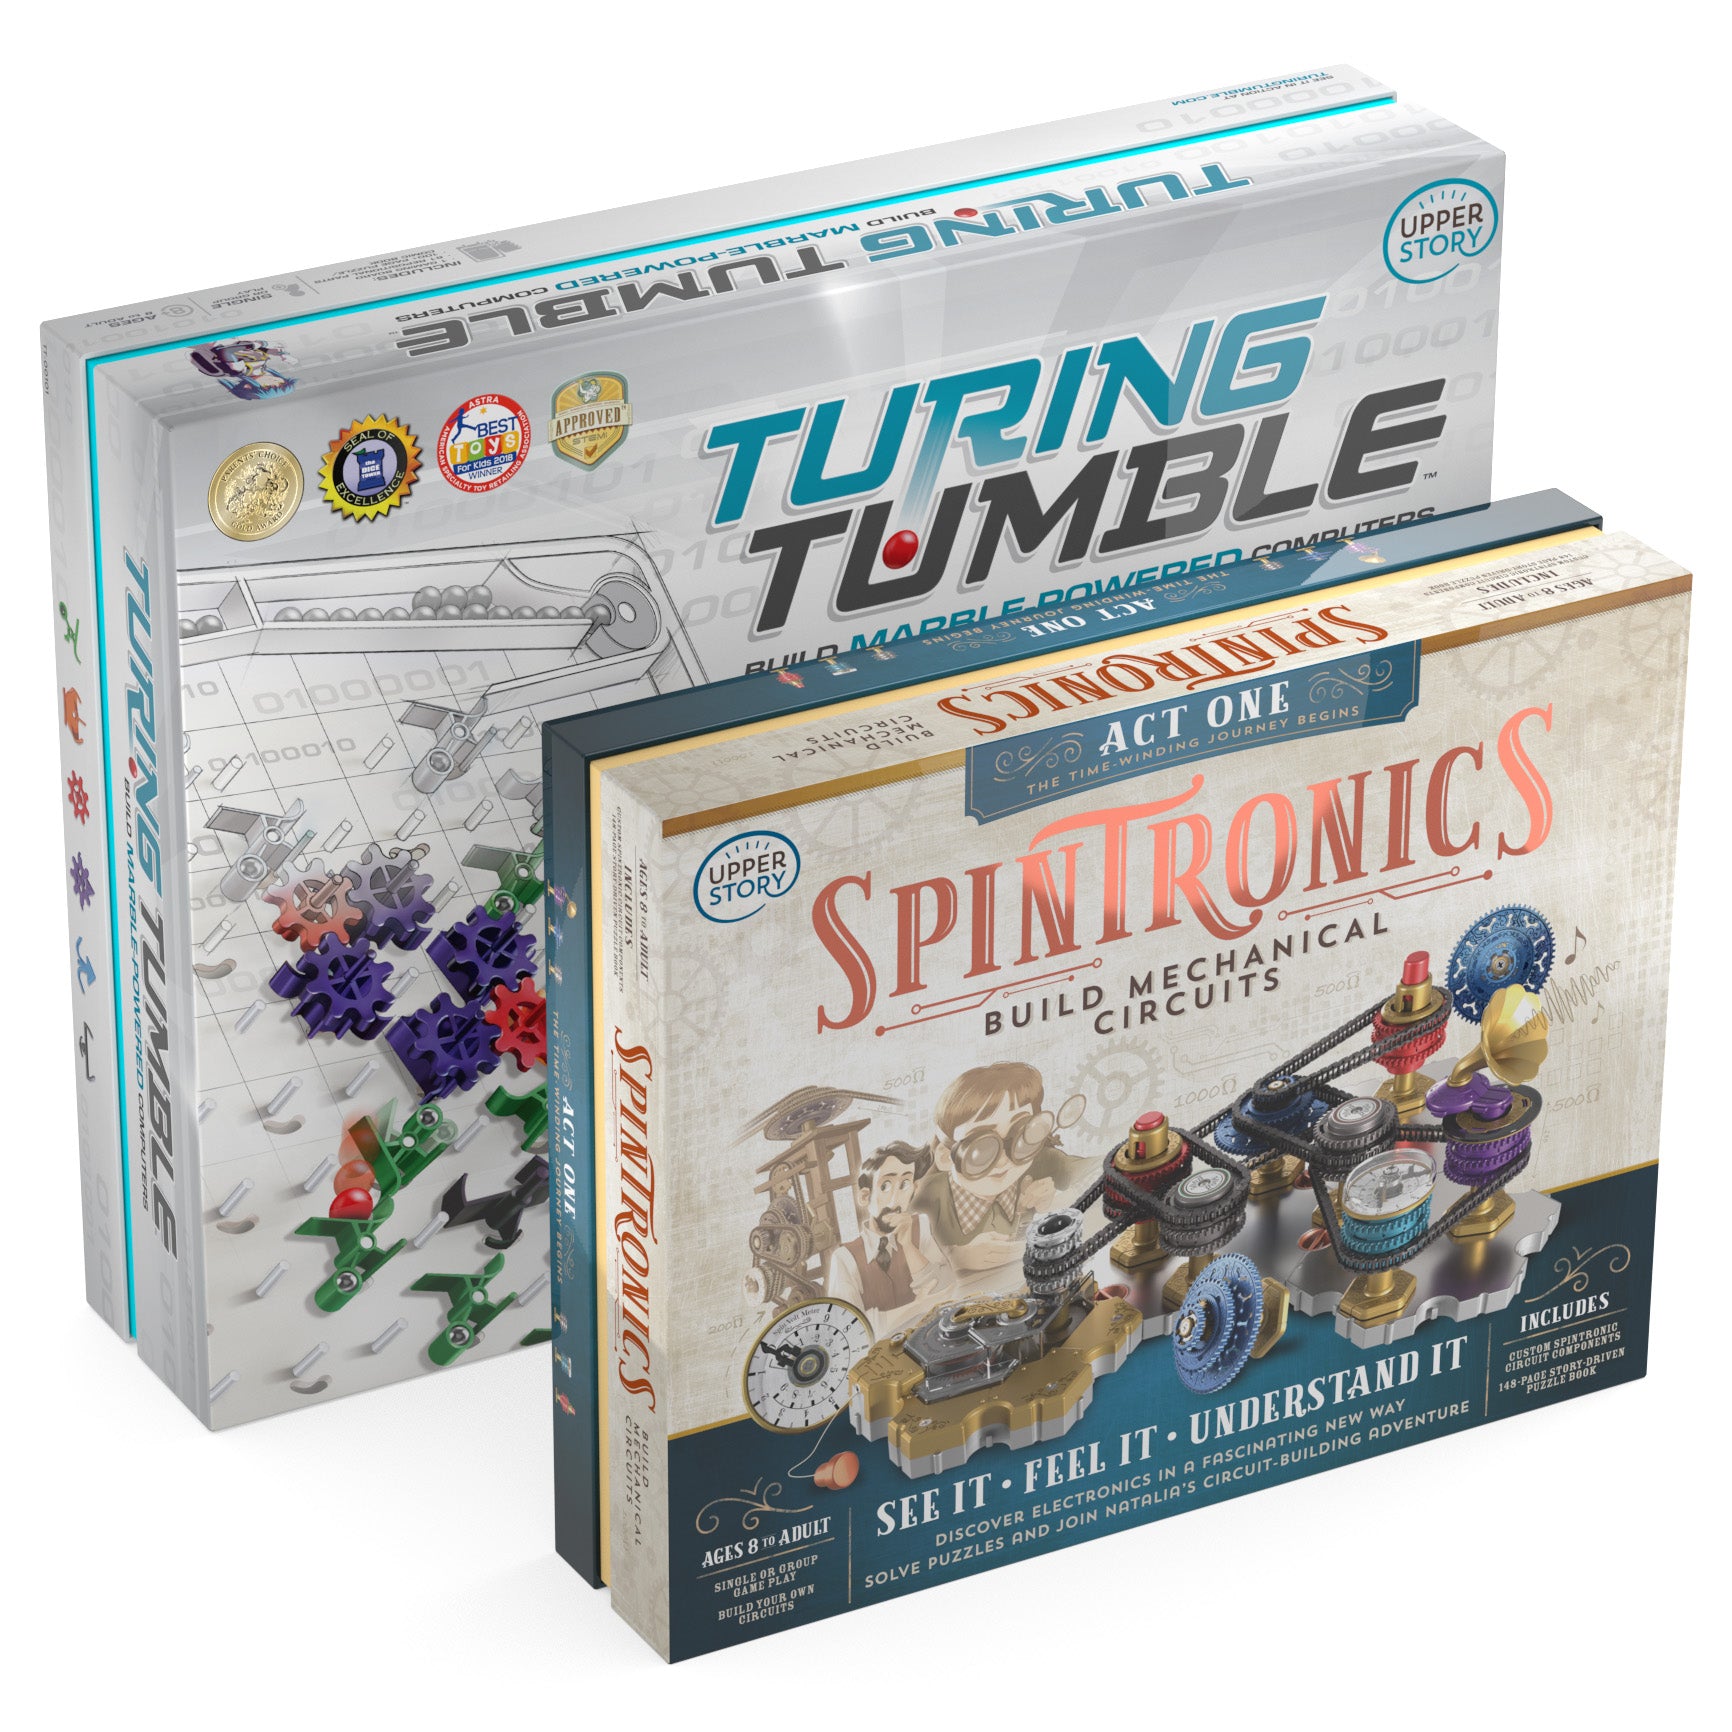 Turing Tumble – Happy Up Inc Toys & Games